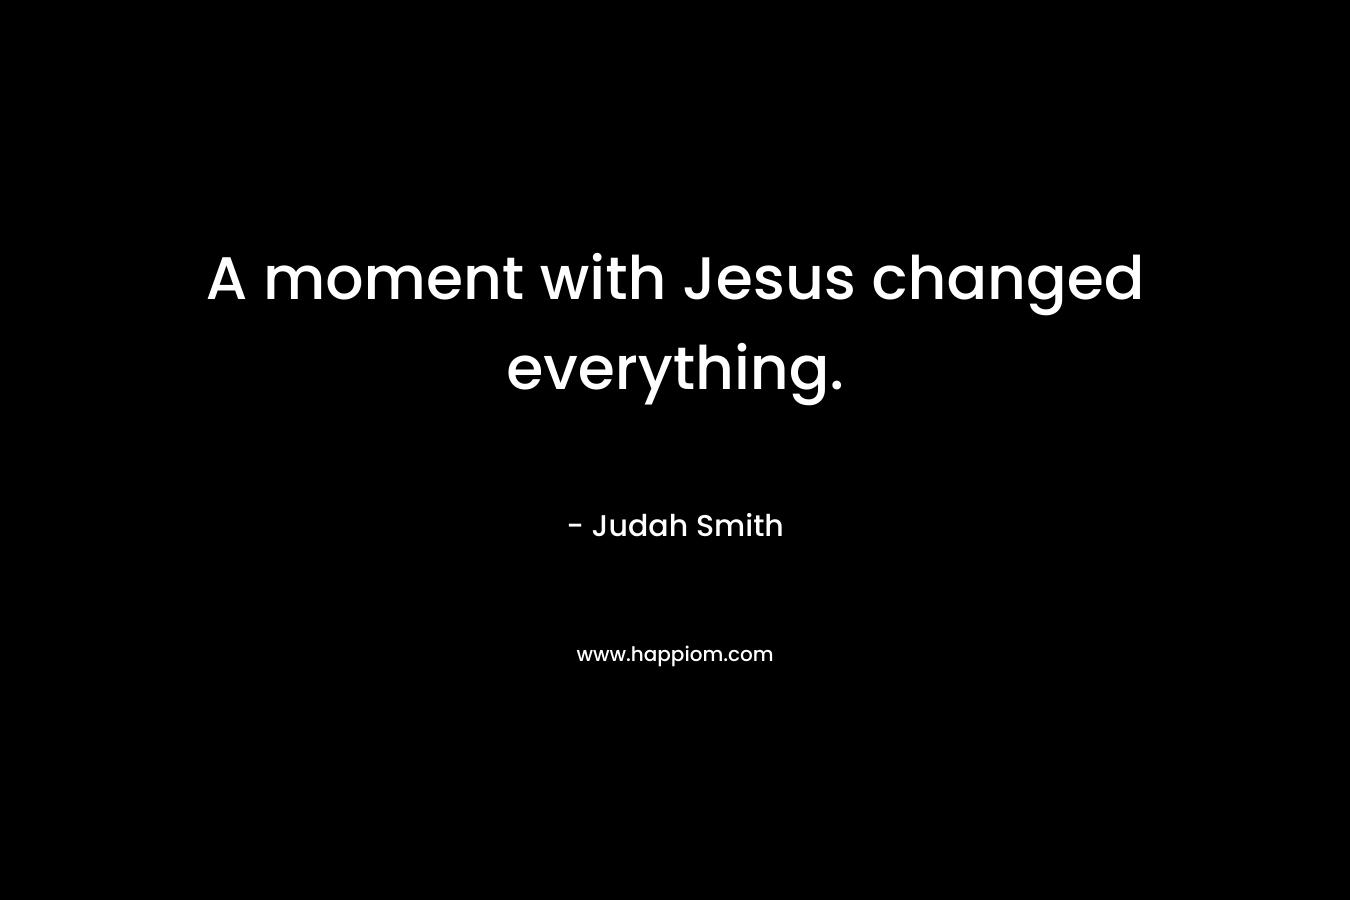 A moment with Jesus changed everything.